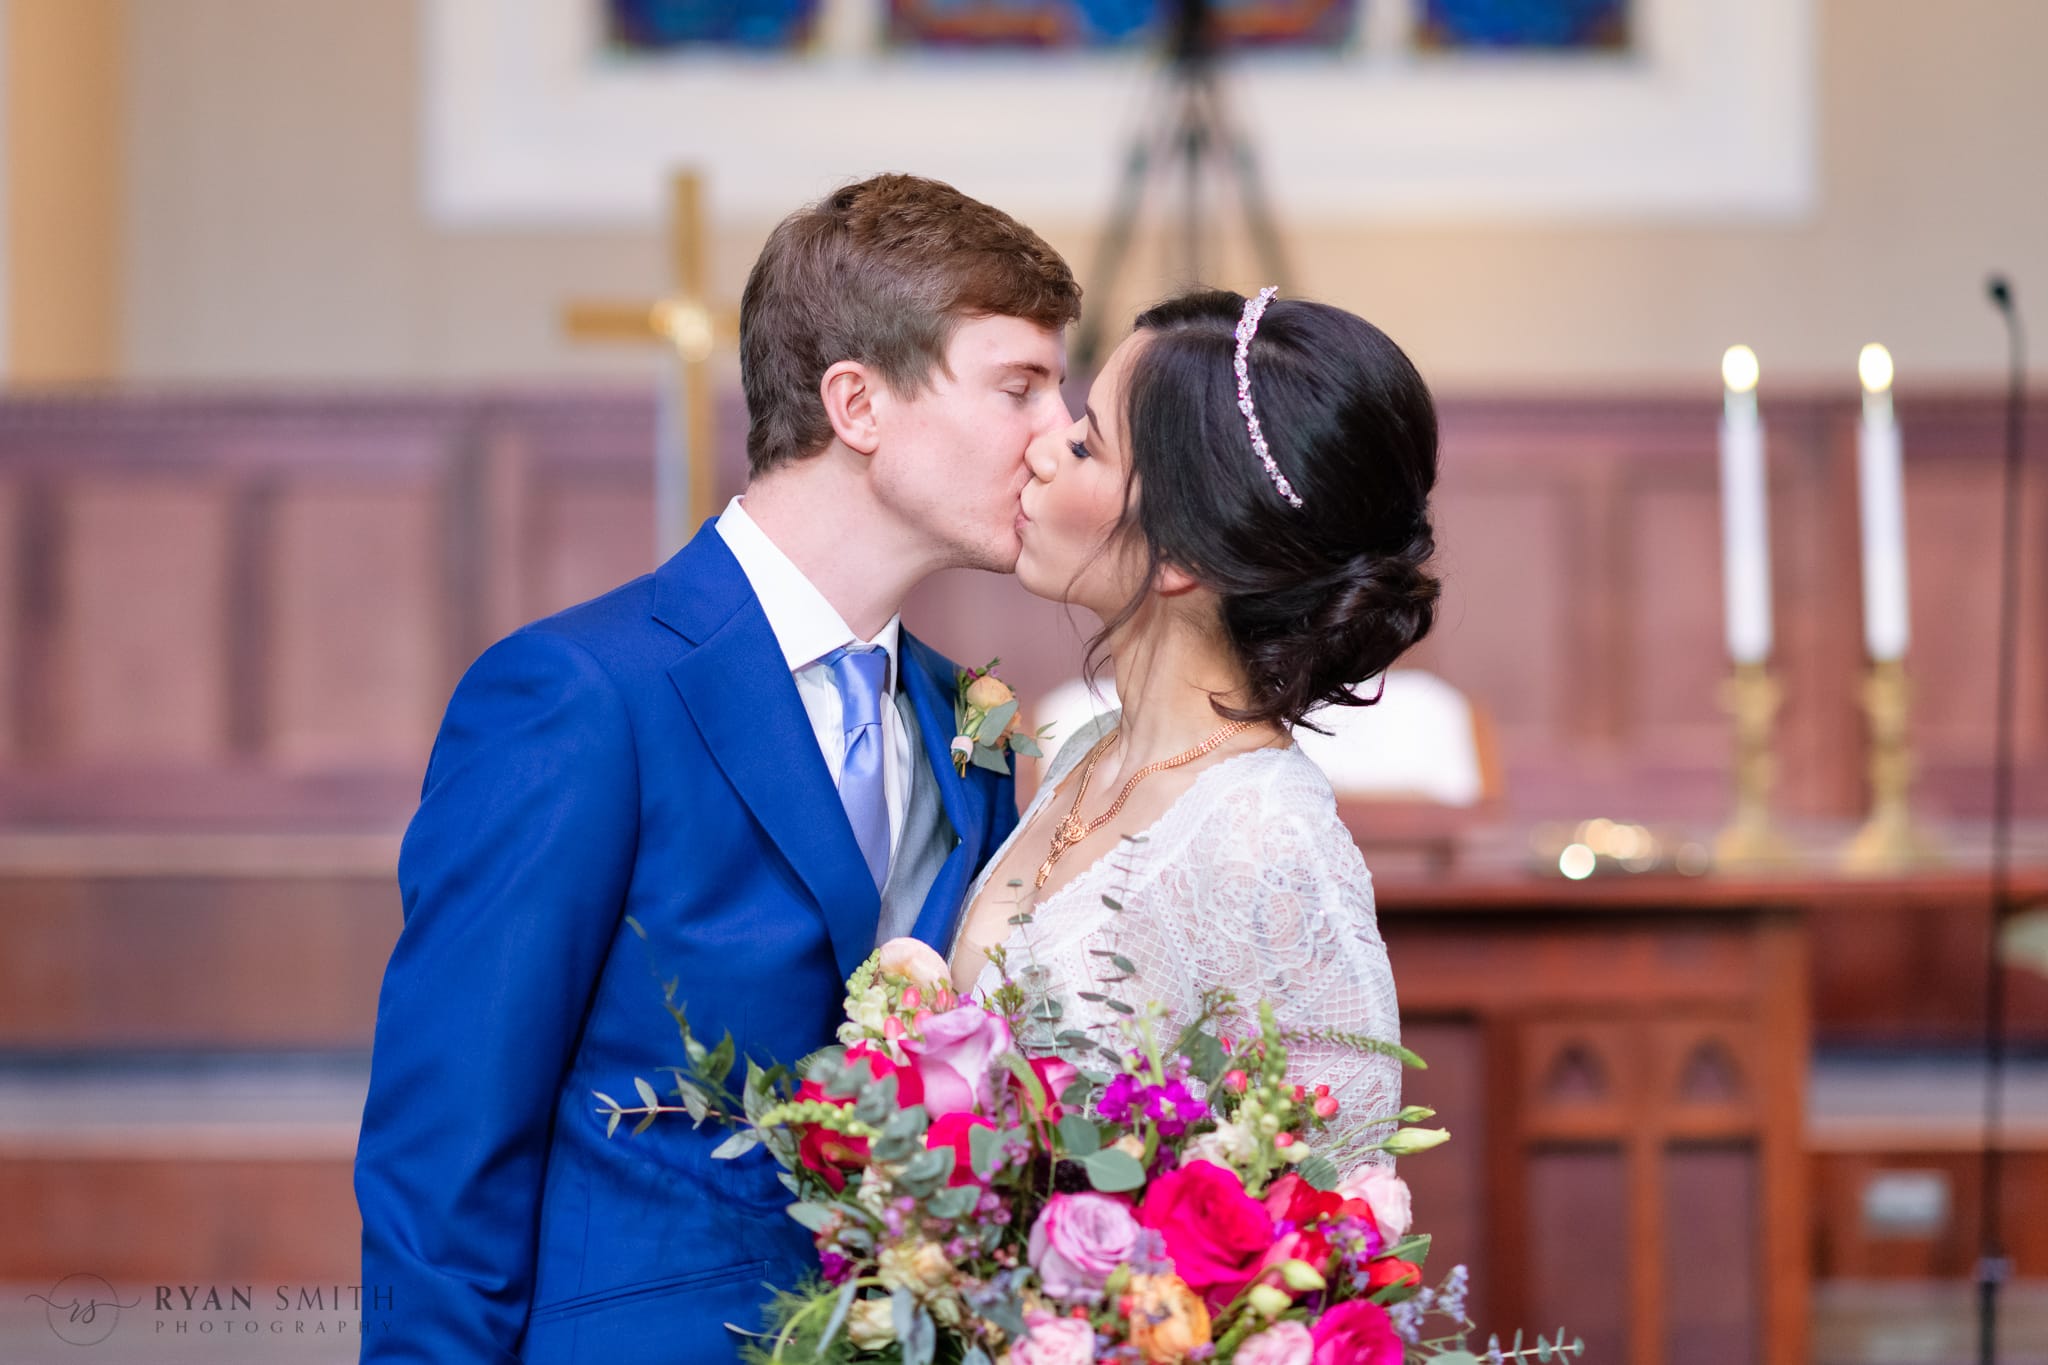 Portraits with wedding couple in the church - Ocean Drive Church - North Myrtle Beach